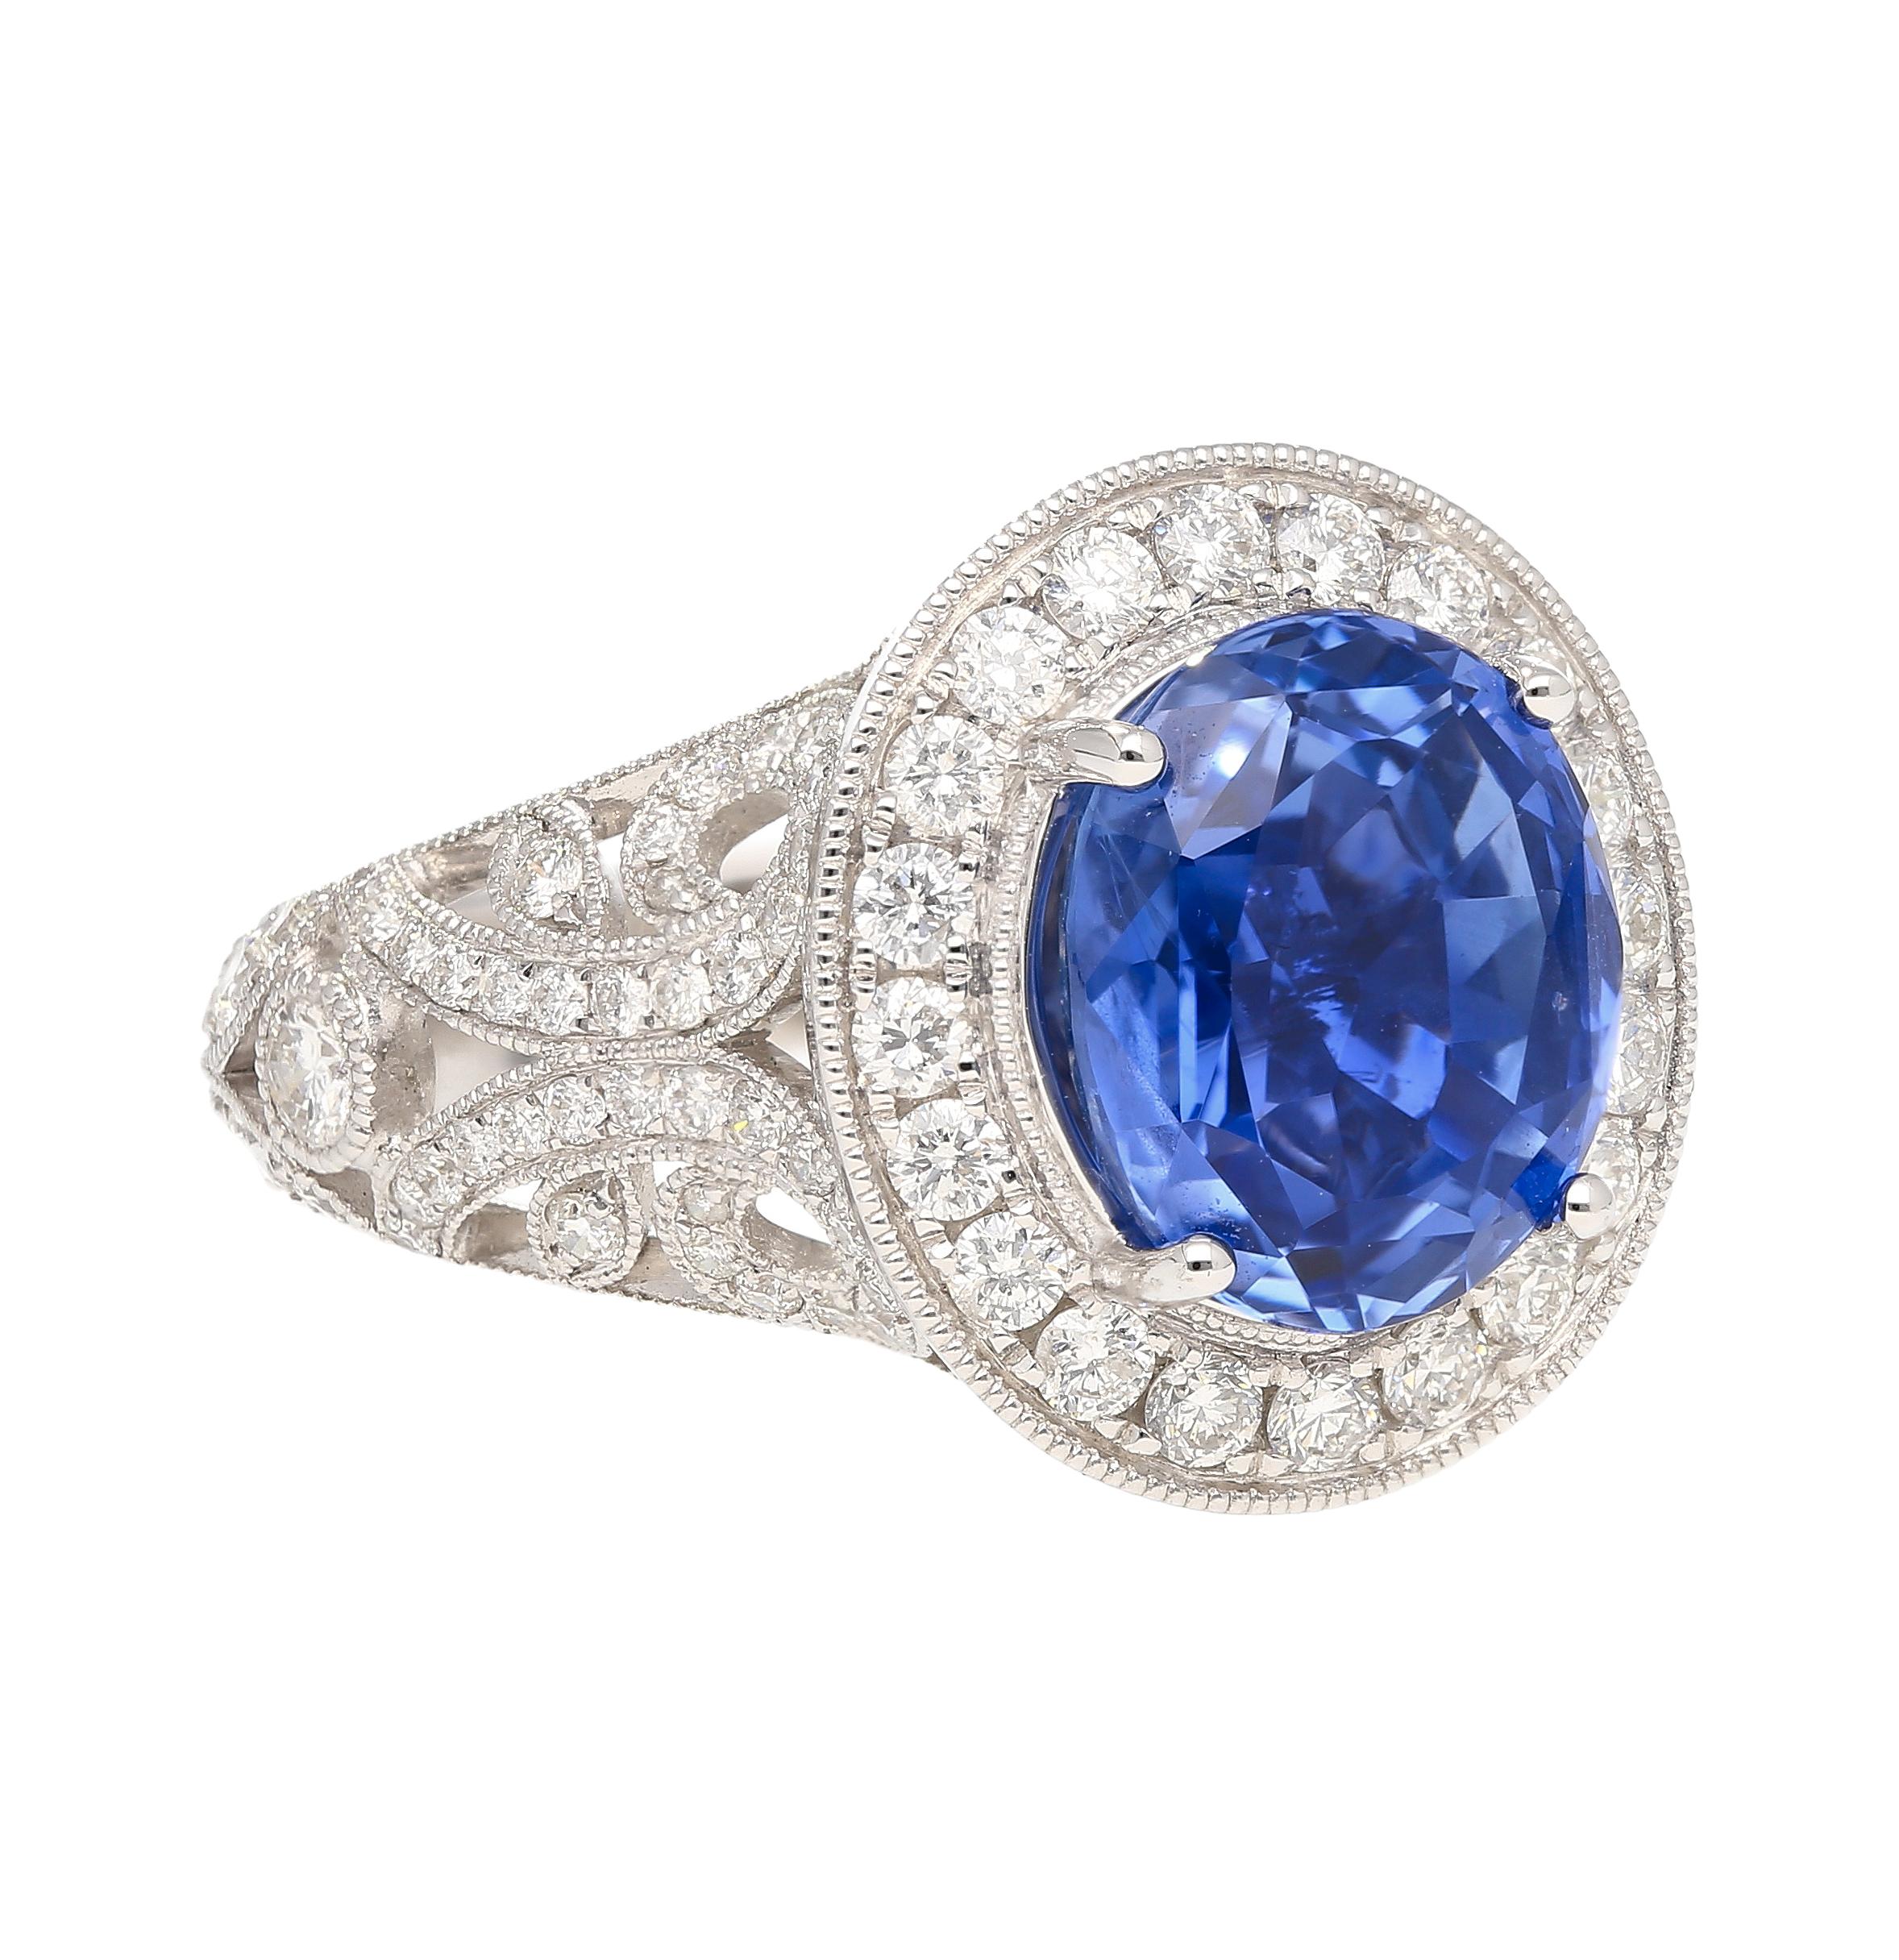 No Heat 4.84 Carat Violet-Blue Ceylon Sapphire with Diamonds in 18K Gold Ring For Sale 2